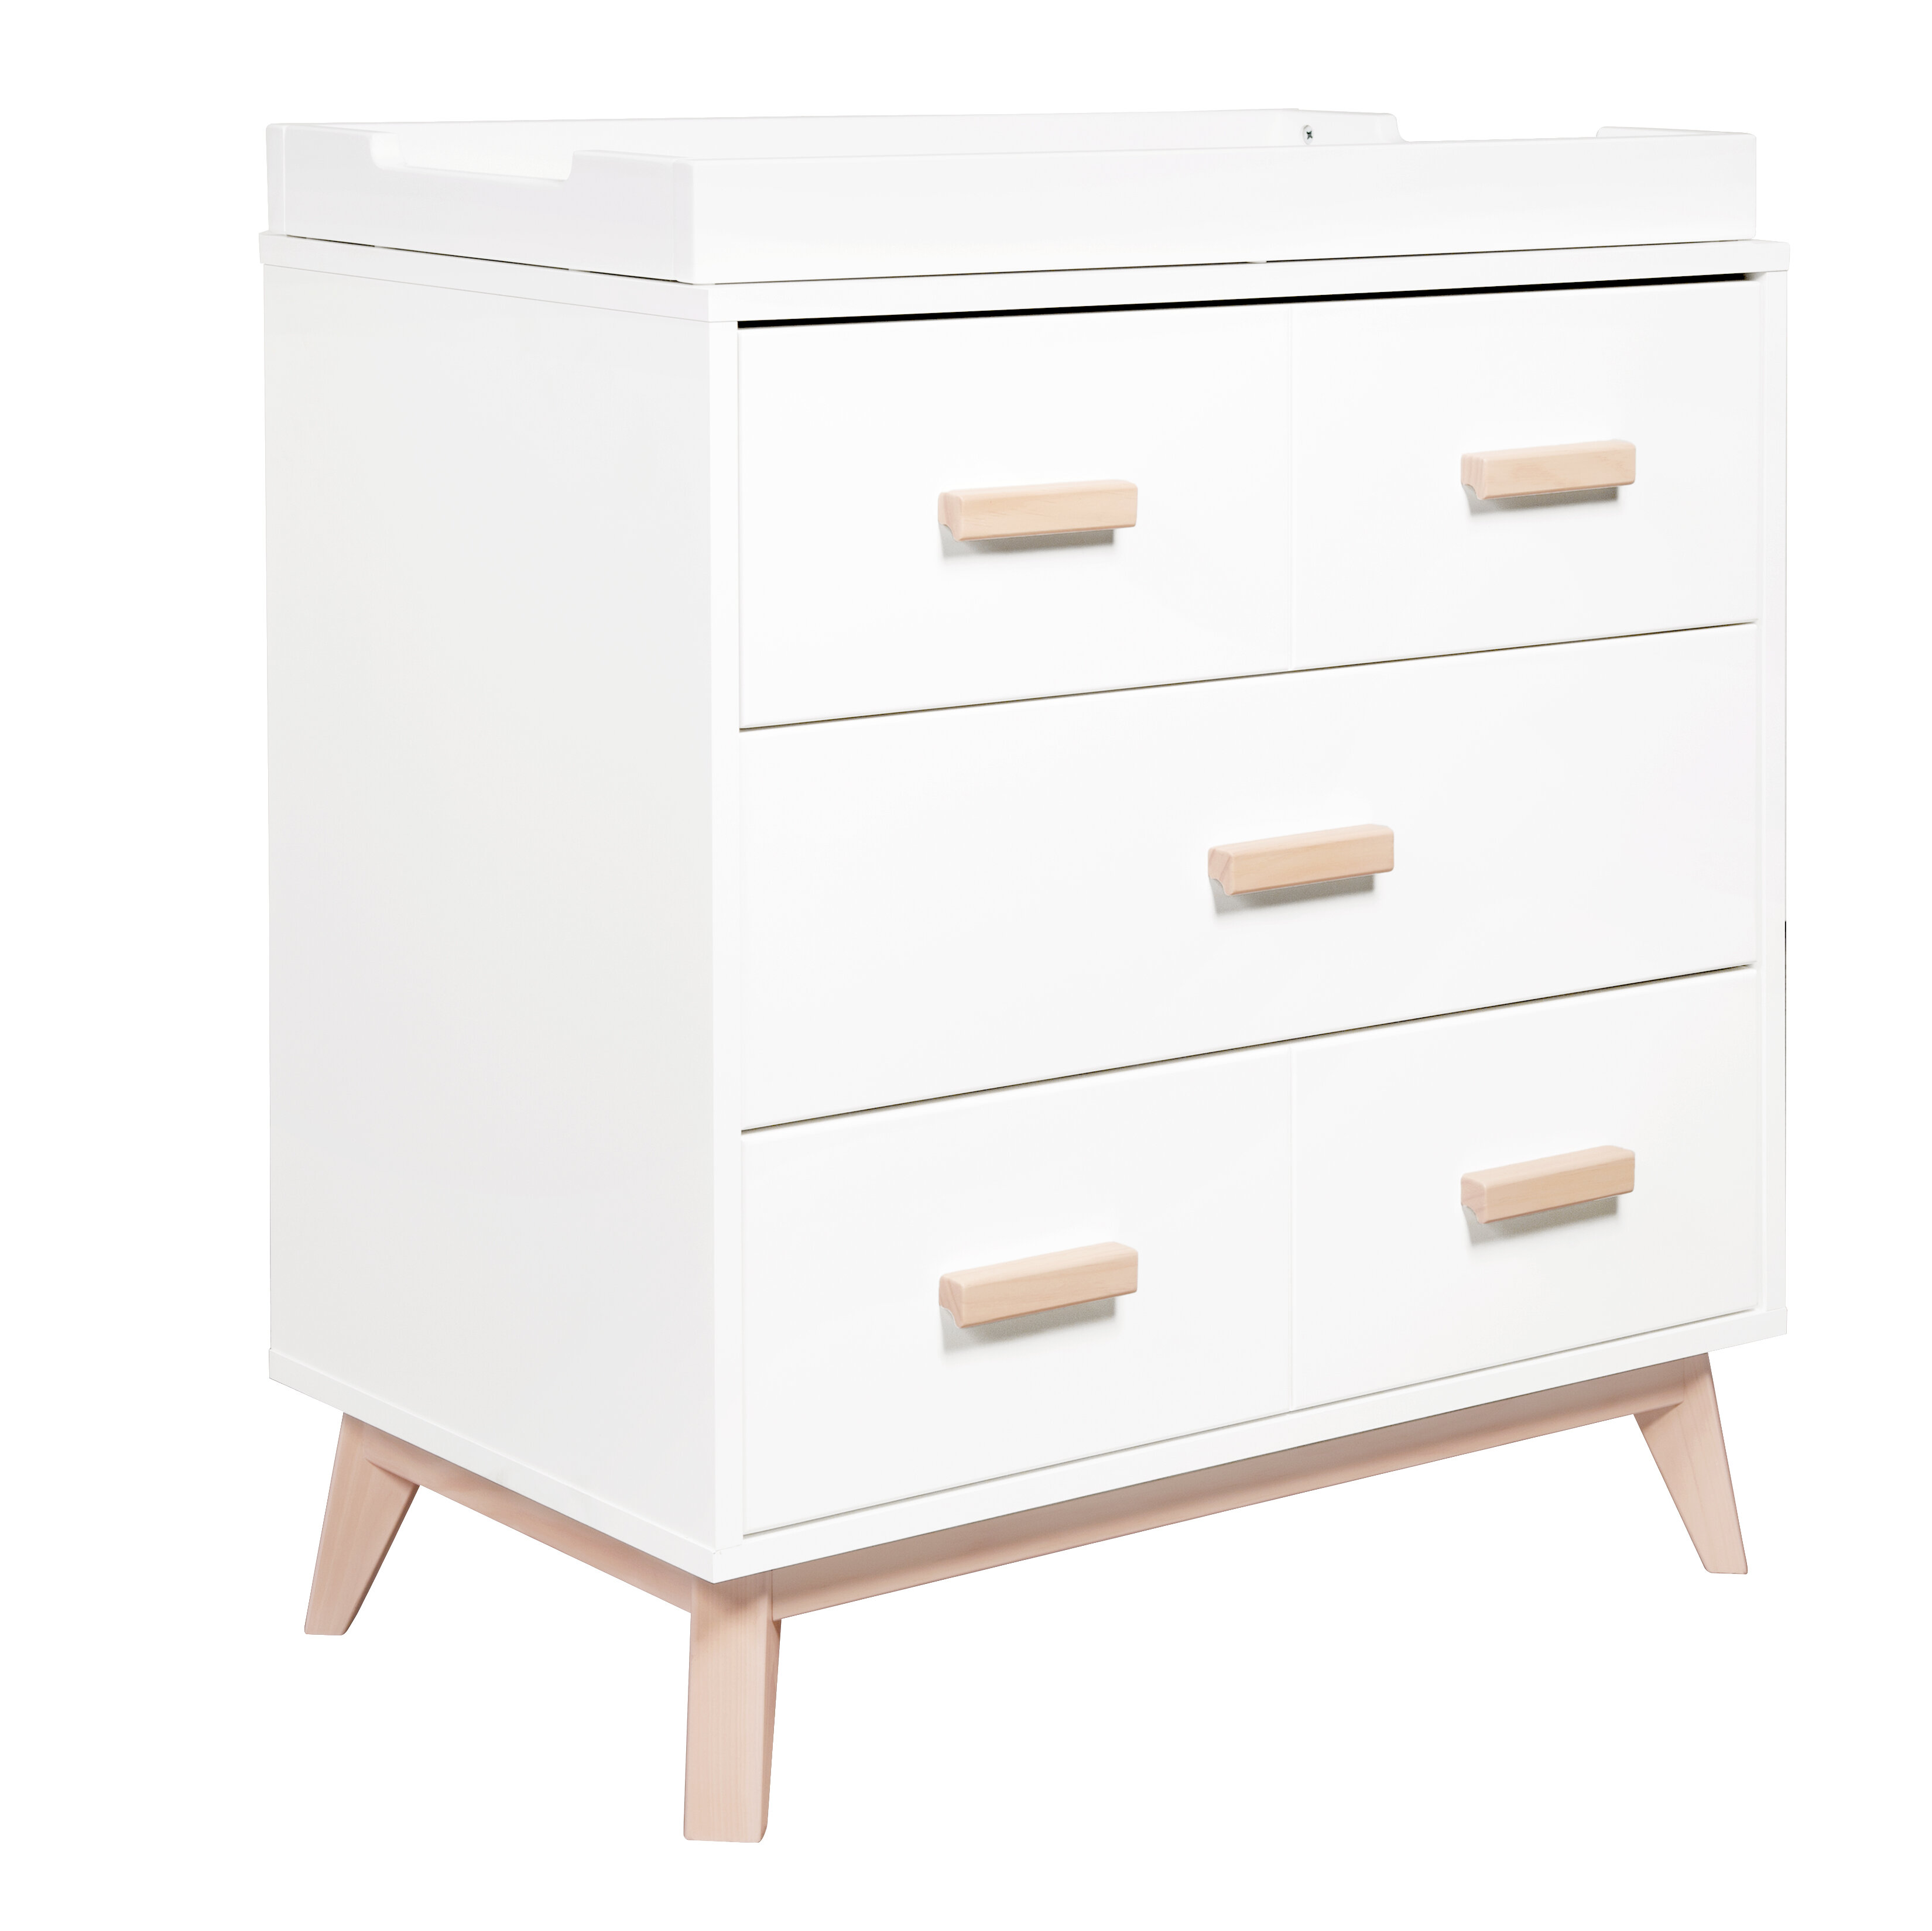 Scoot 3 Drawer Changing Table Dresser Reviews Allmodern